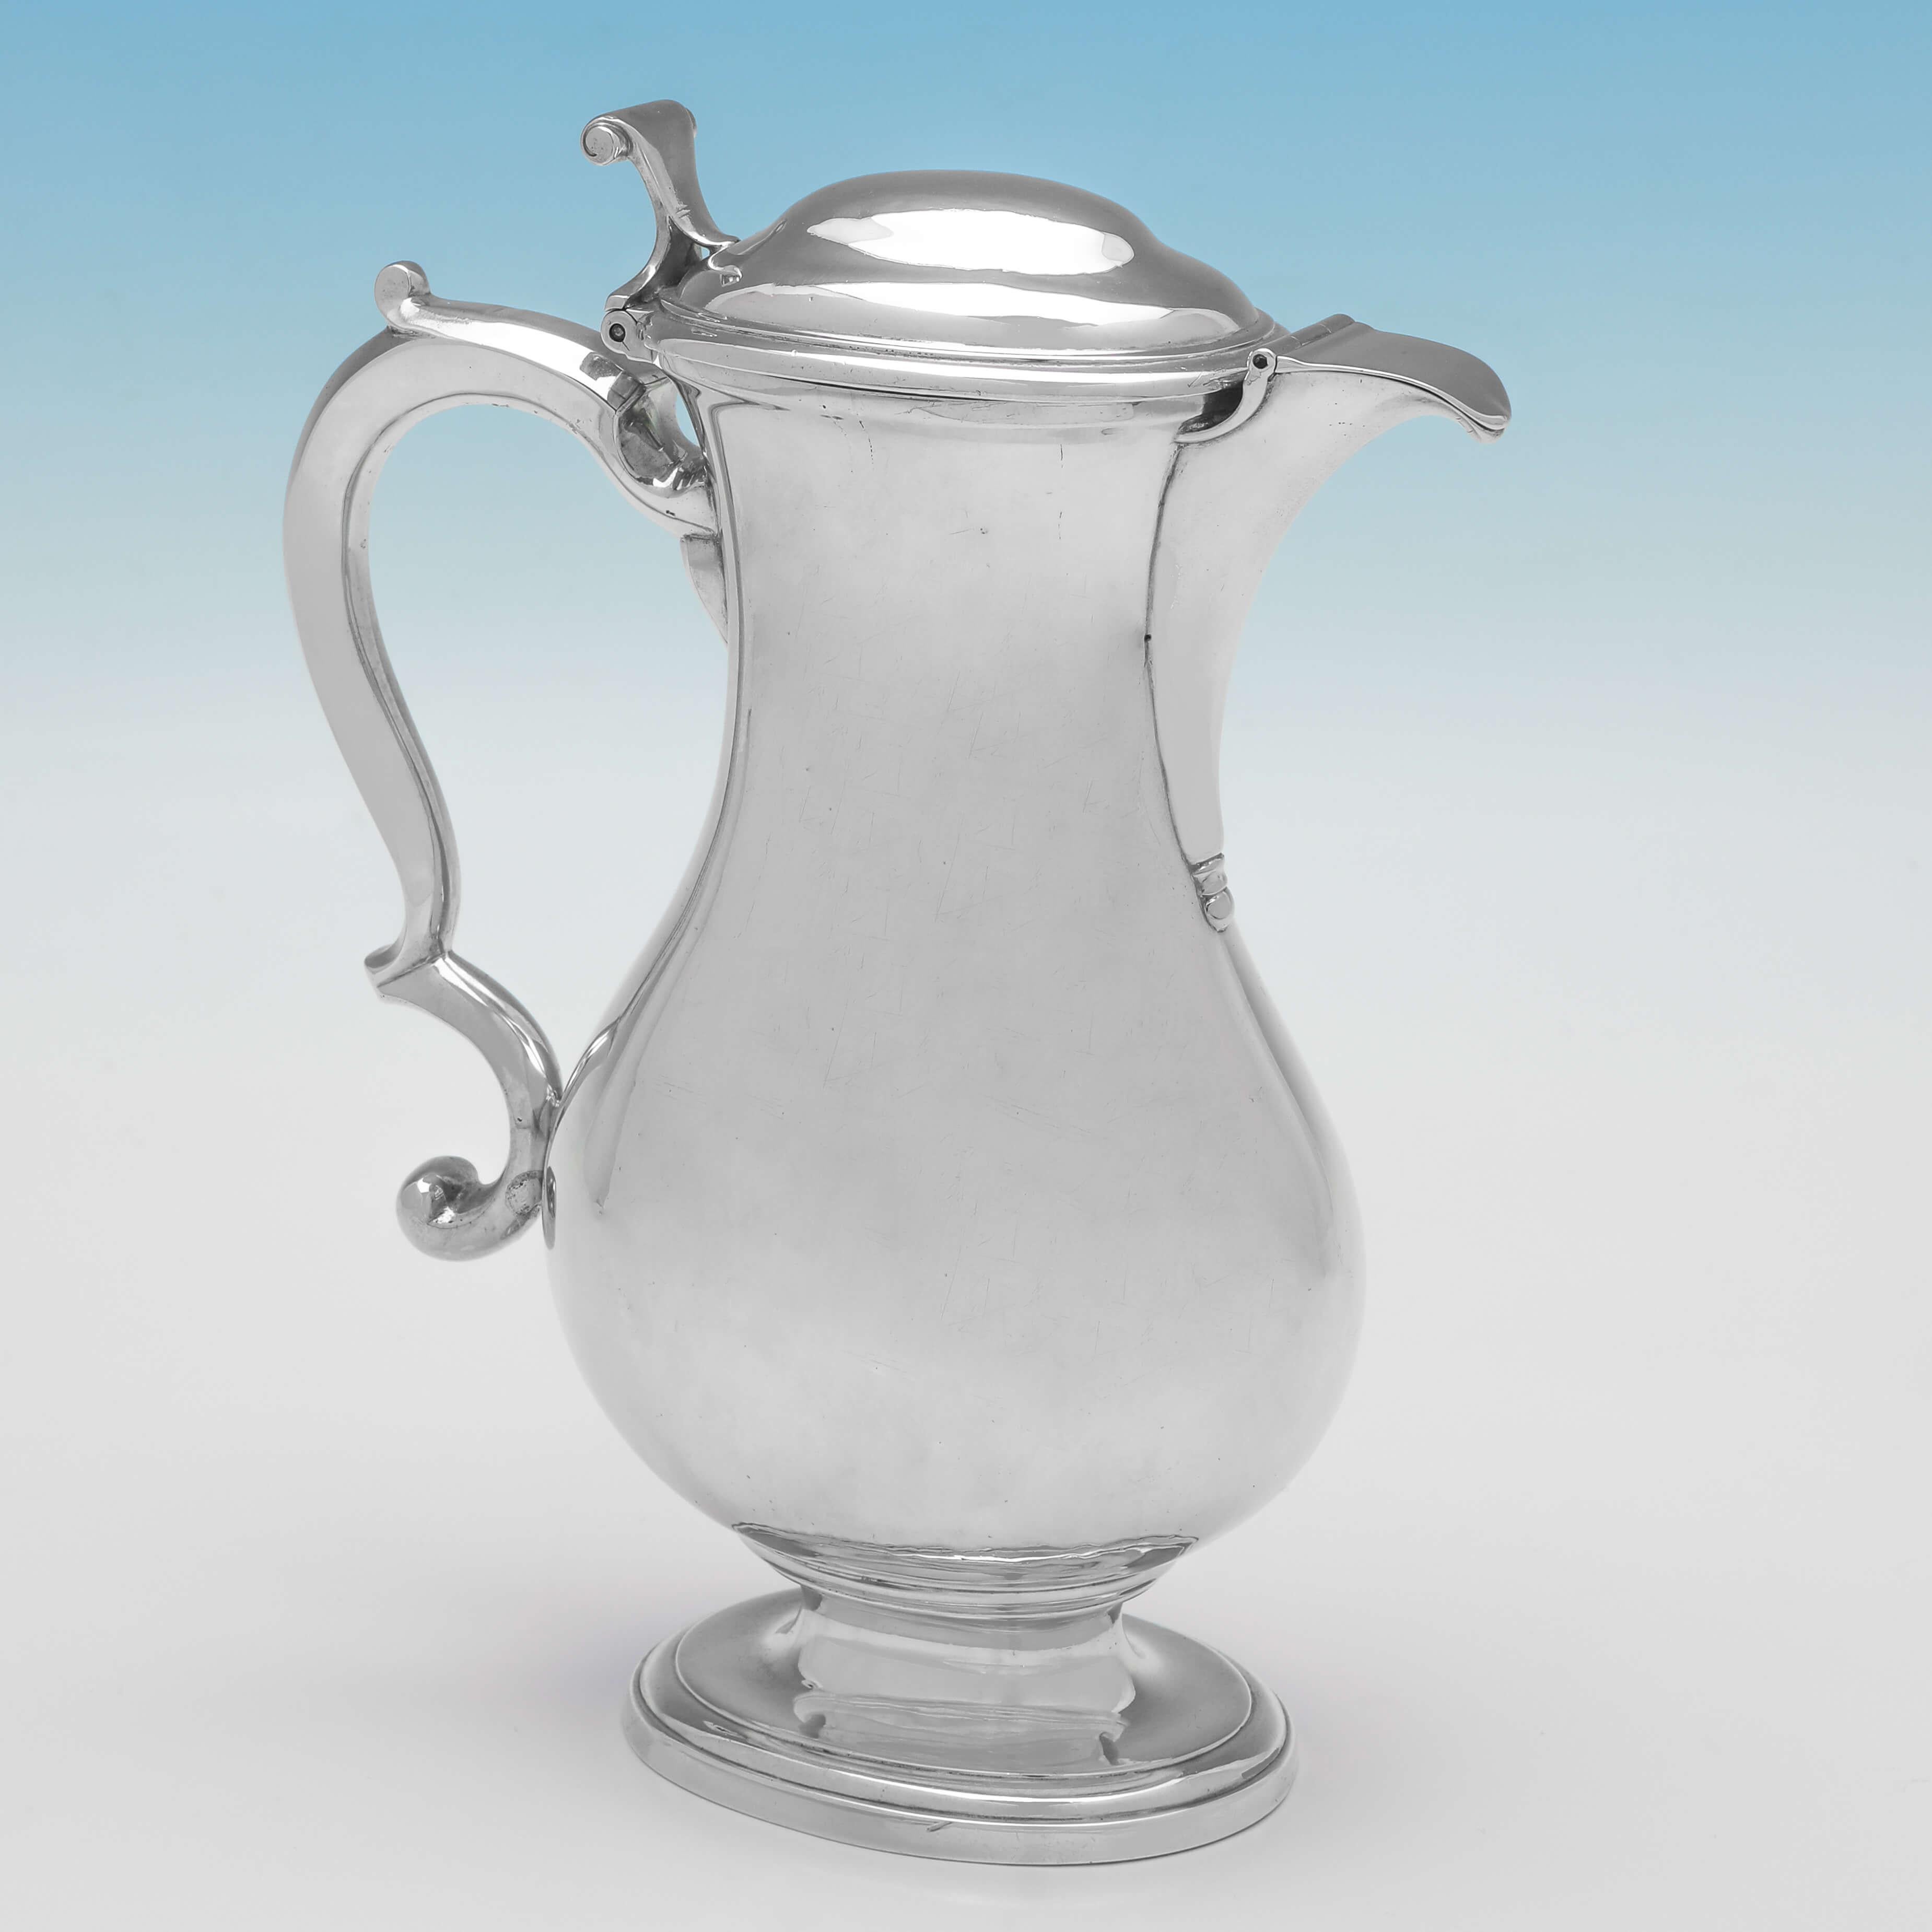 Hallmarked in London in 1752 by Paul Crespin, this very fine and rare example of a George II period, antique sterling silver shaving jug, is plain in design, with a flattened baluster shape, a hinged lid and a hinged cover to the spout. 

The